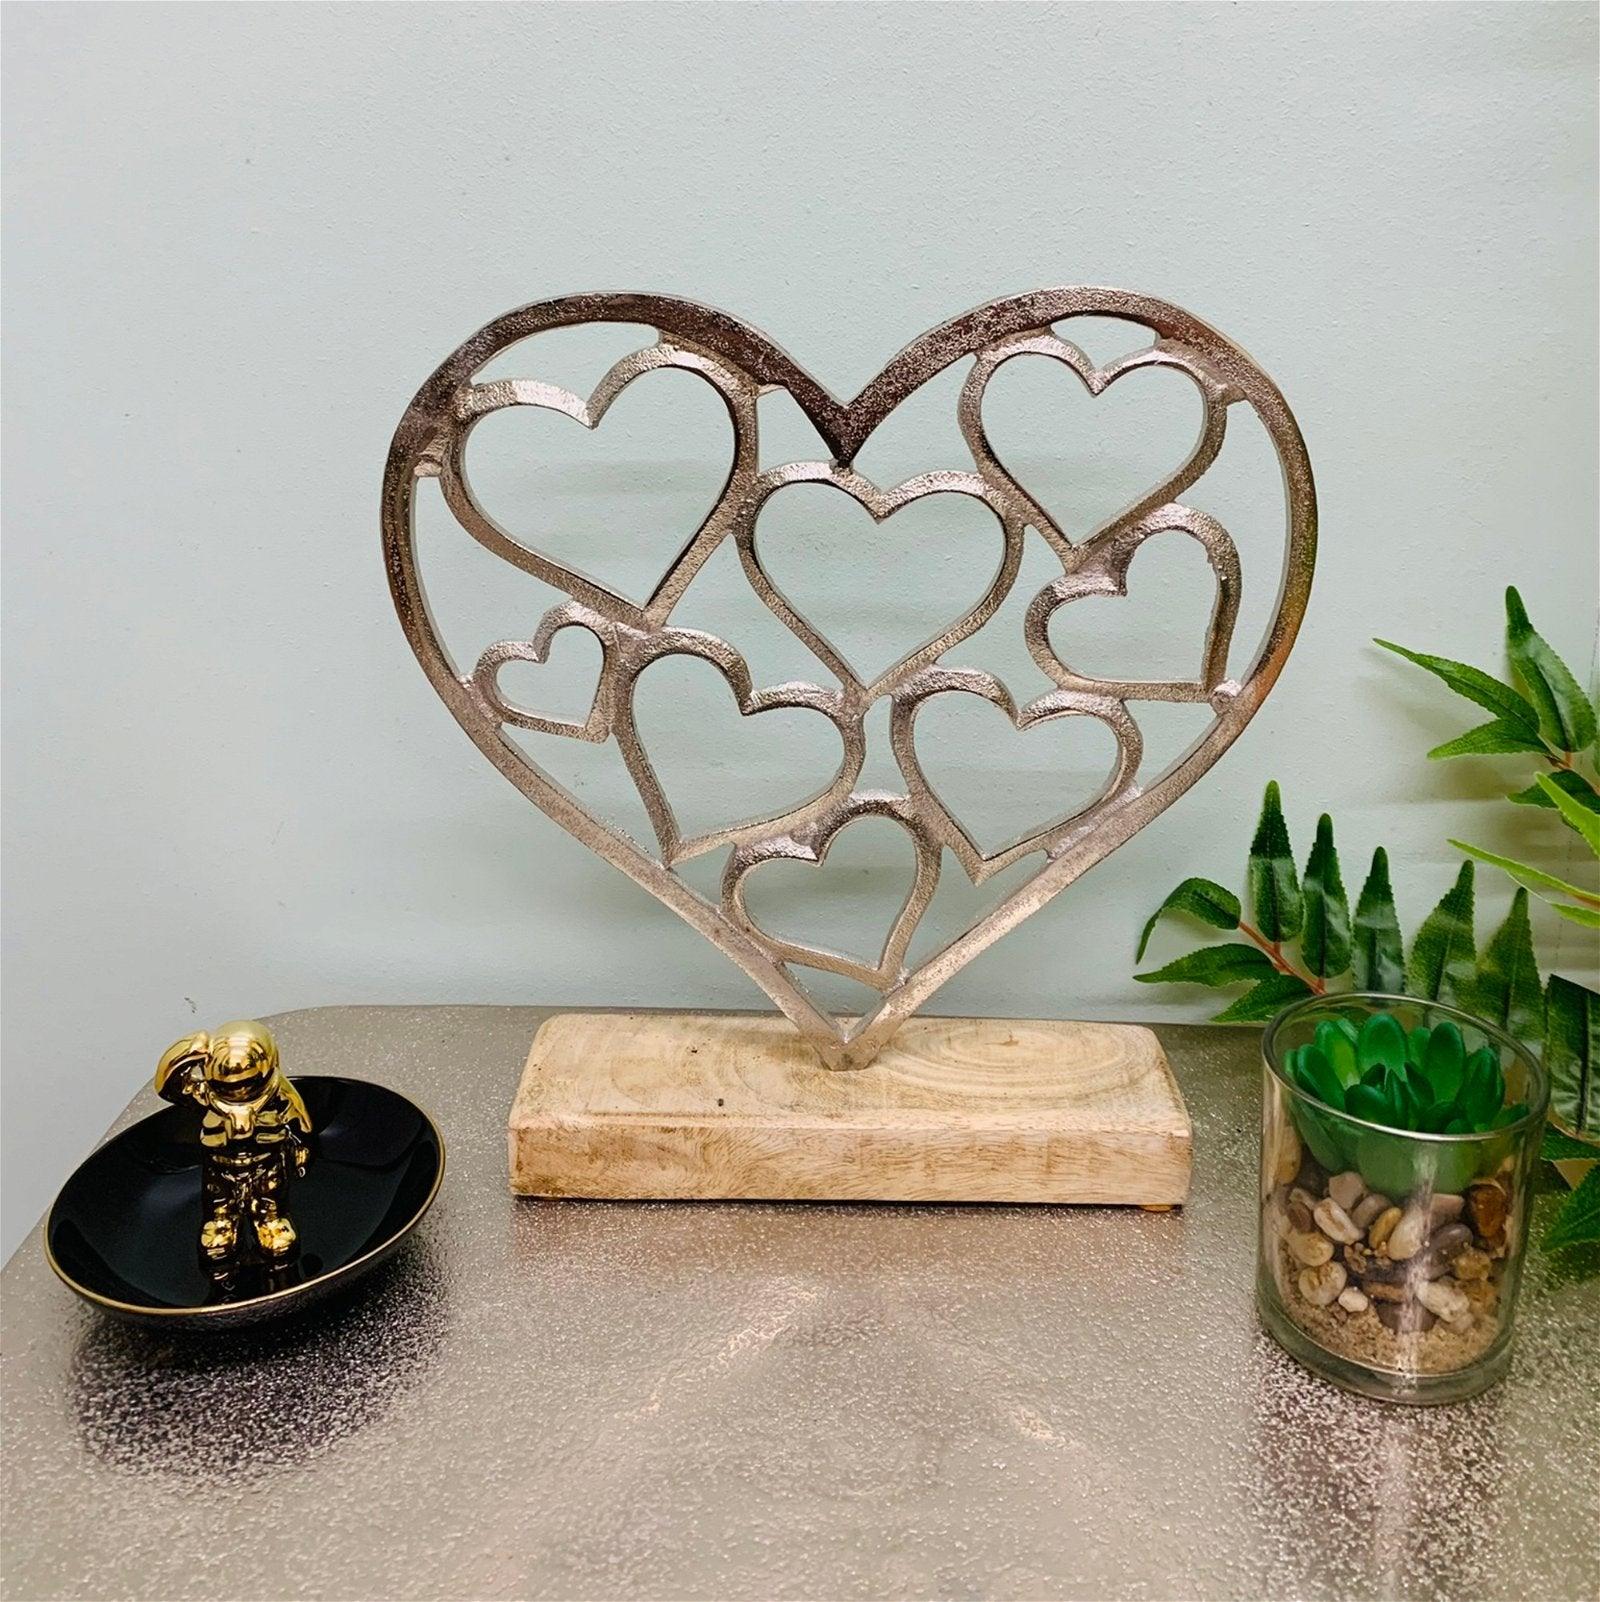 Metal Silver Hearts On A Wooden Base Small - £16.99 - Ornaments 